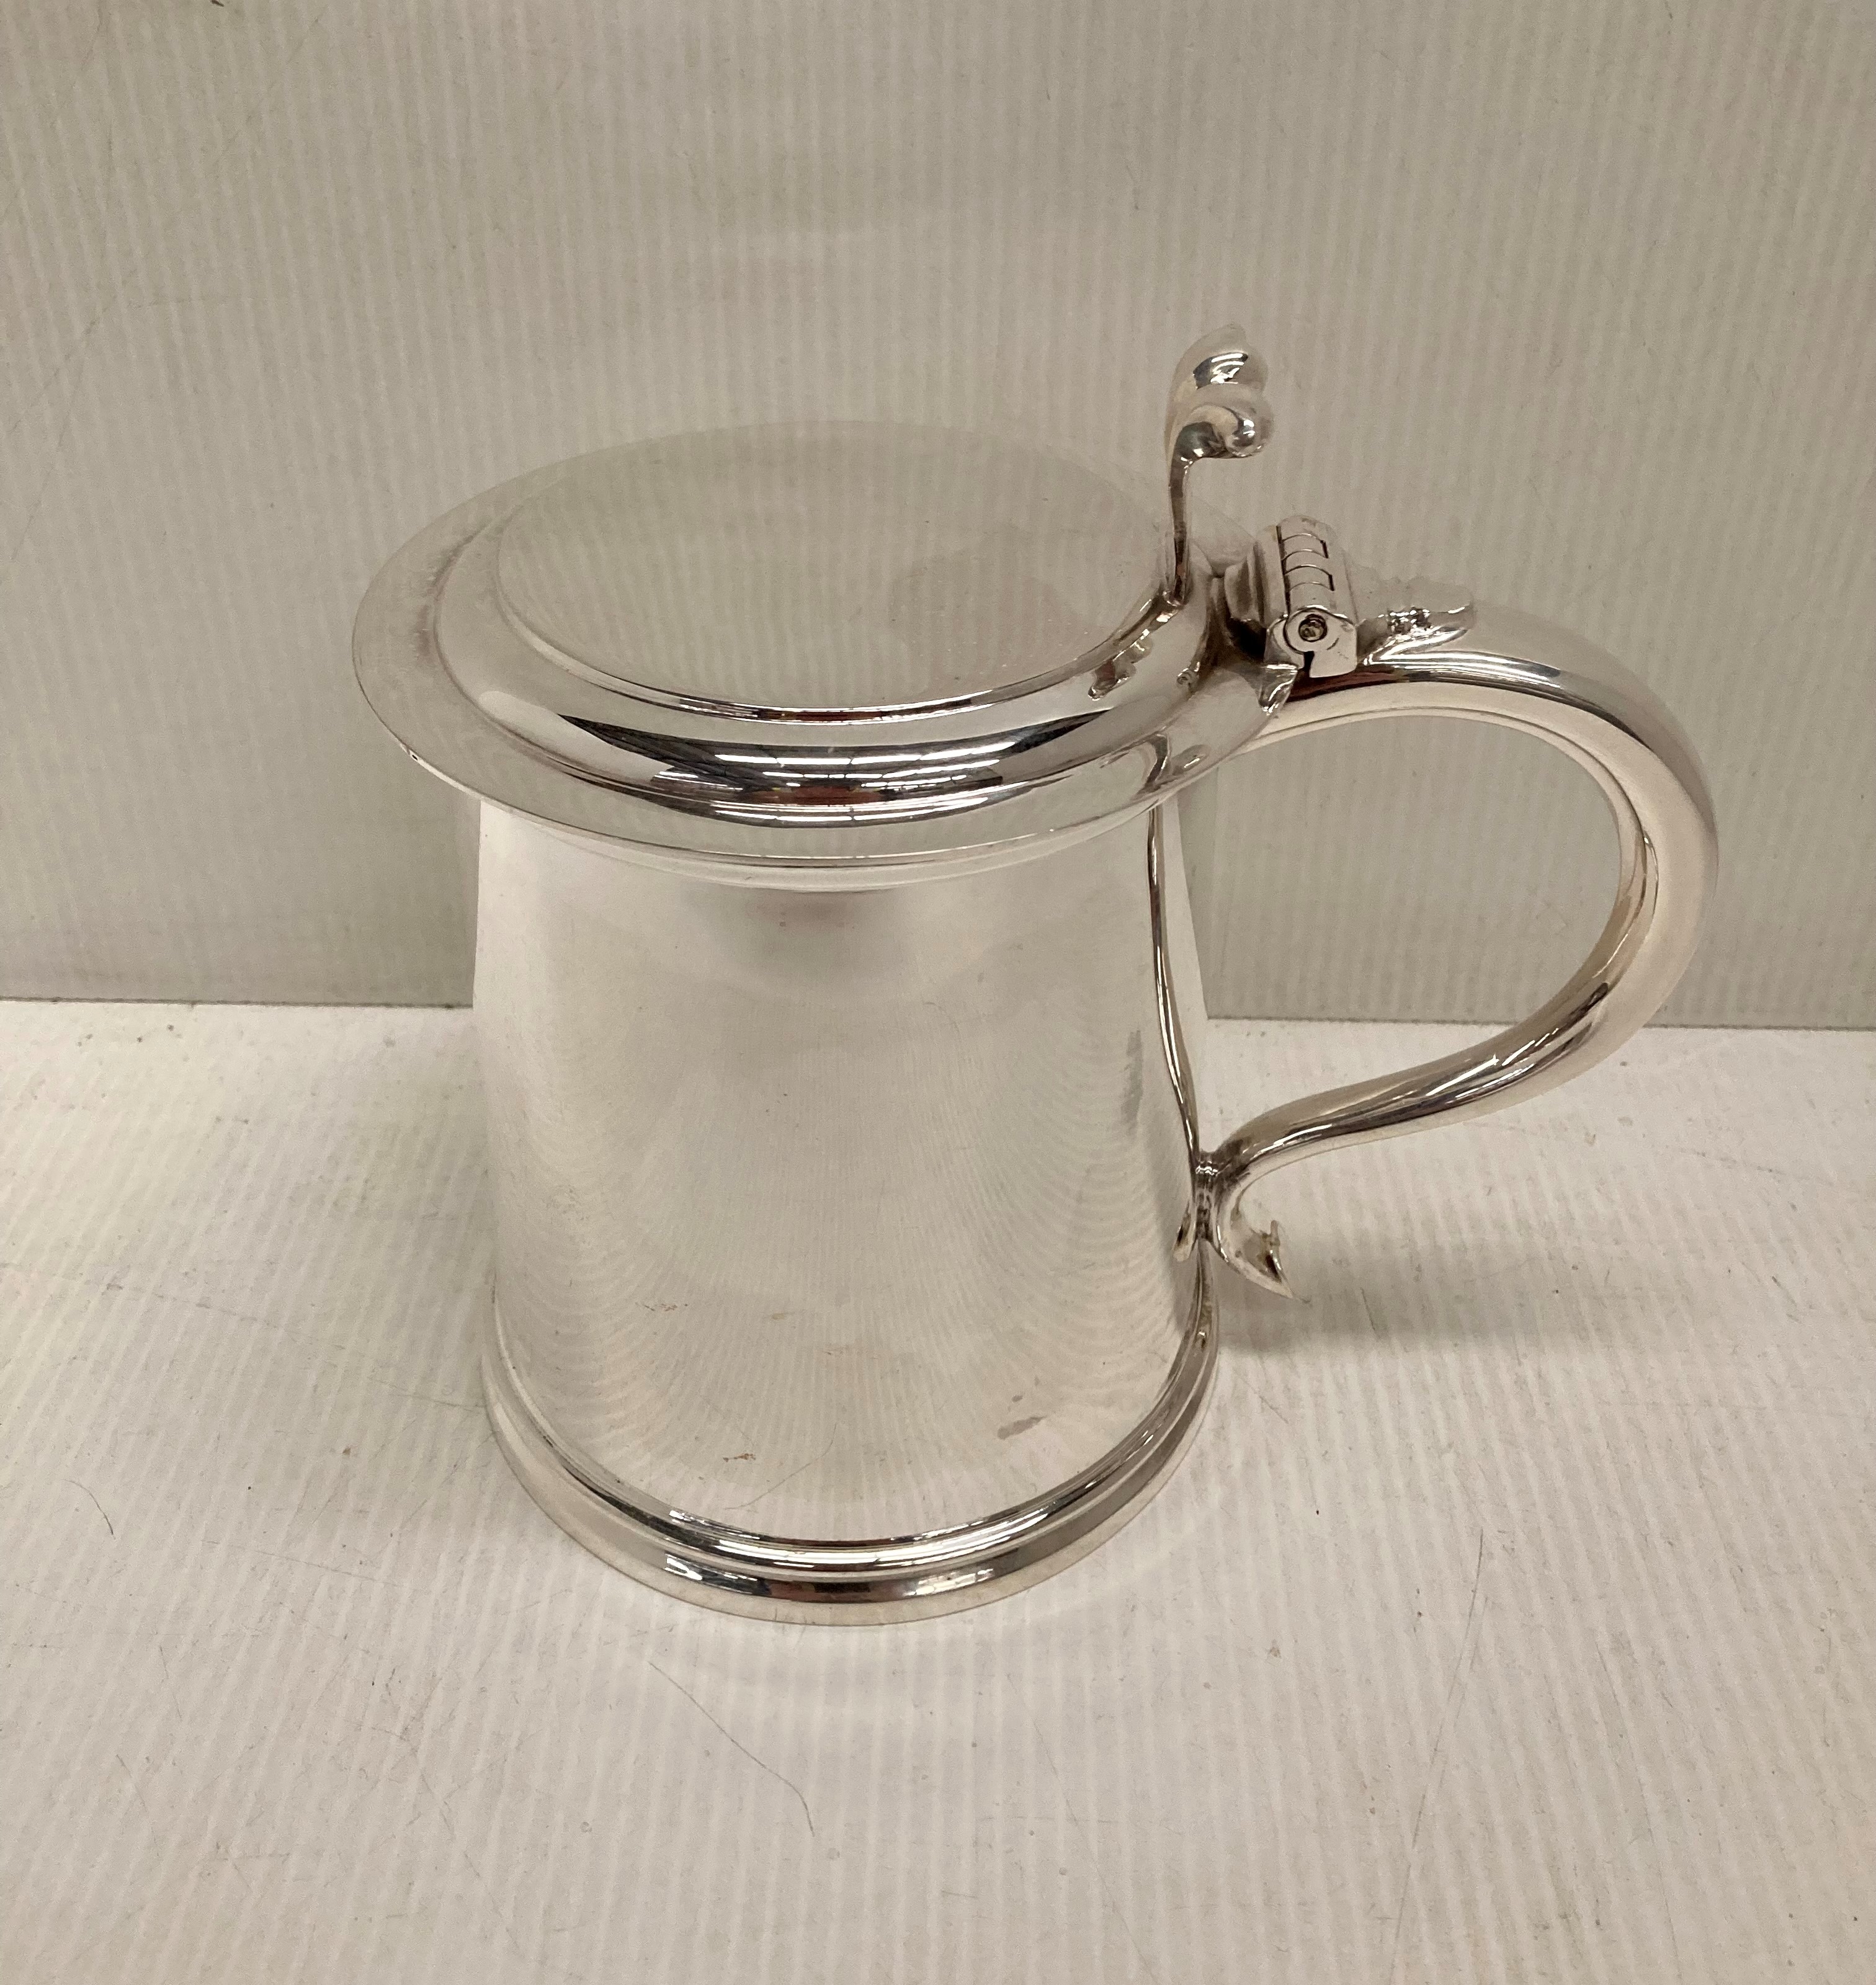 Large 17th Century style flat top tankard by Atkin Bros Sheffield 1928 with plain design and with a - Image 5 of 6